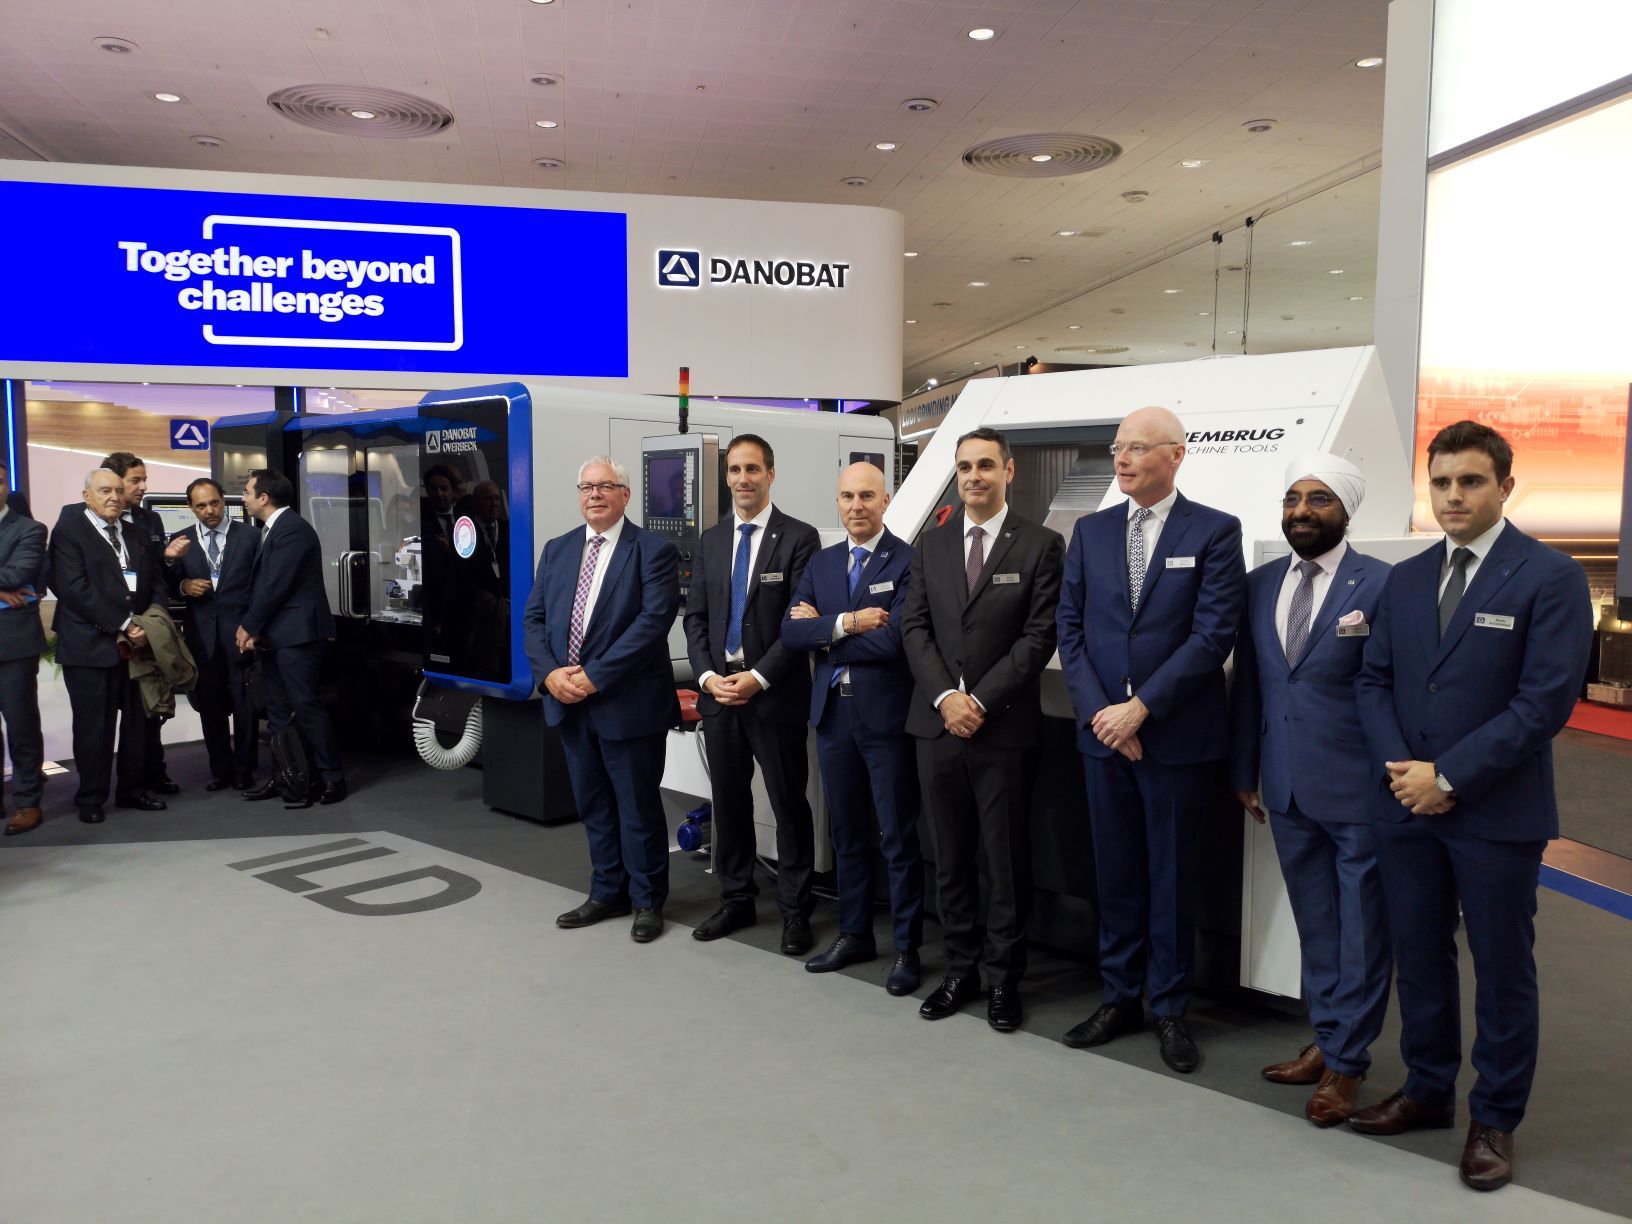 Danobat acquires the Dutch firm Hembrug Machine Tools to strengthen its position in the field of finish hard turning